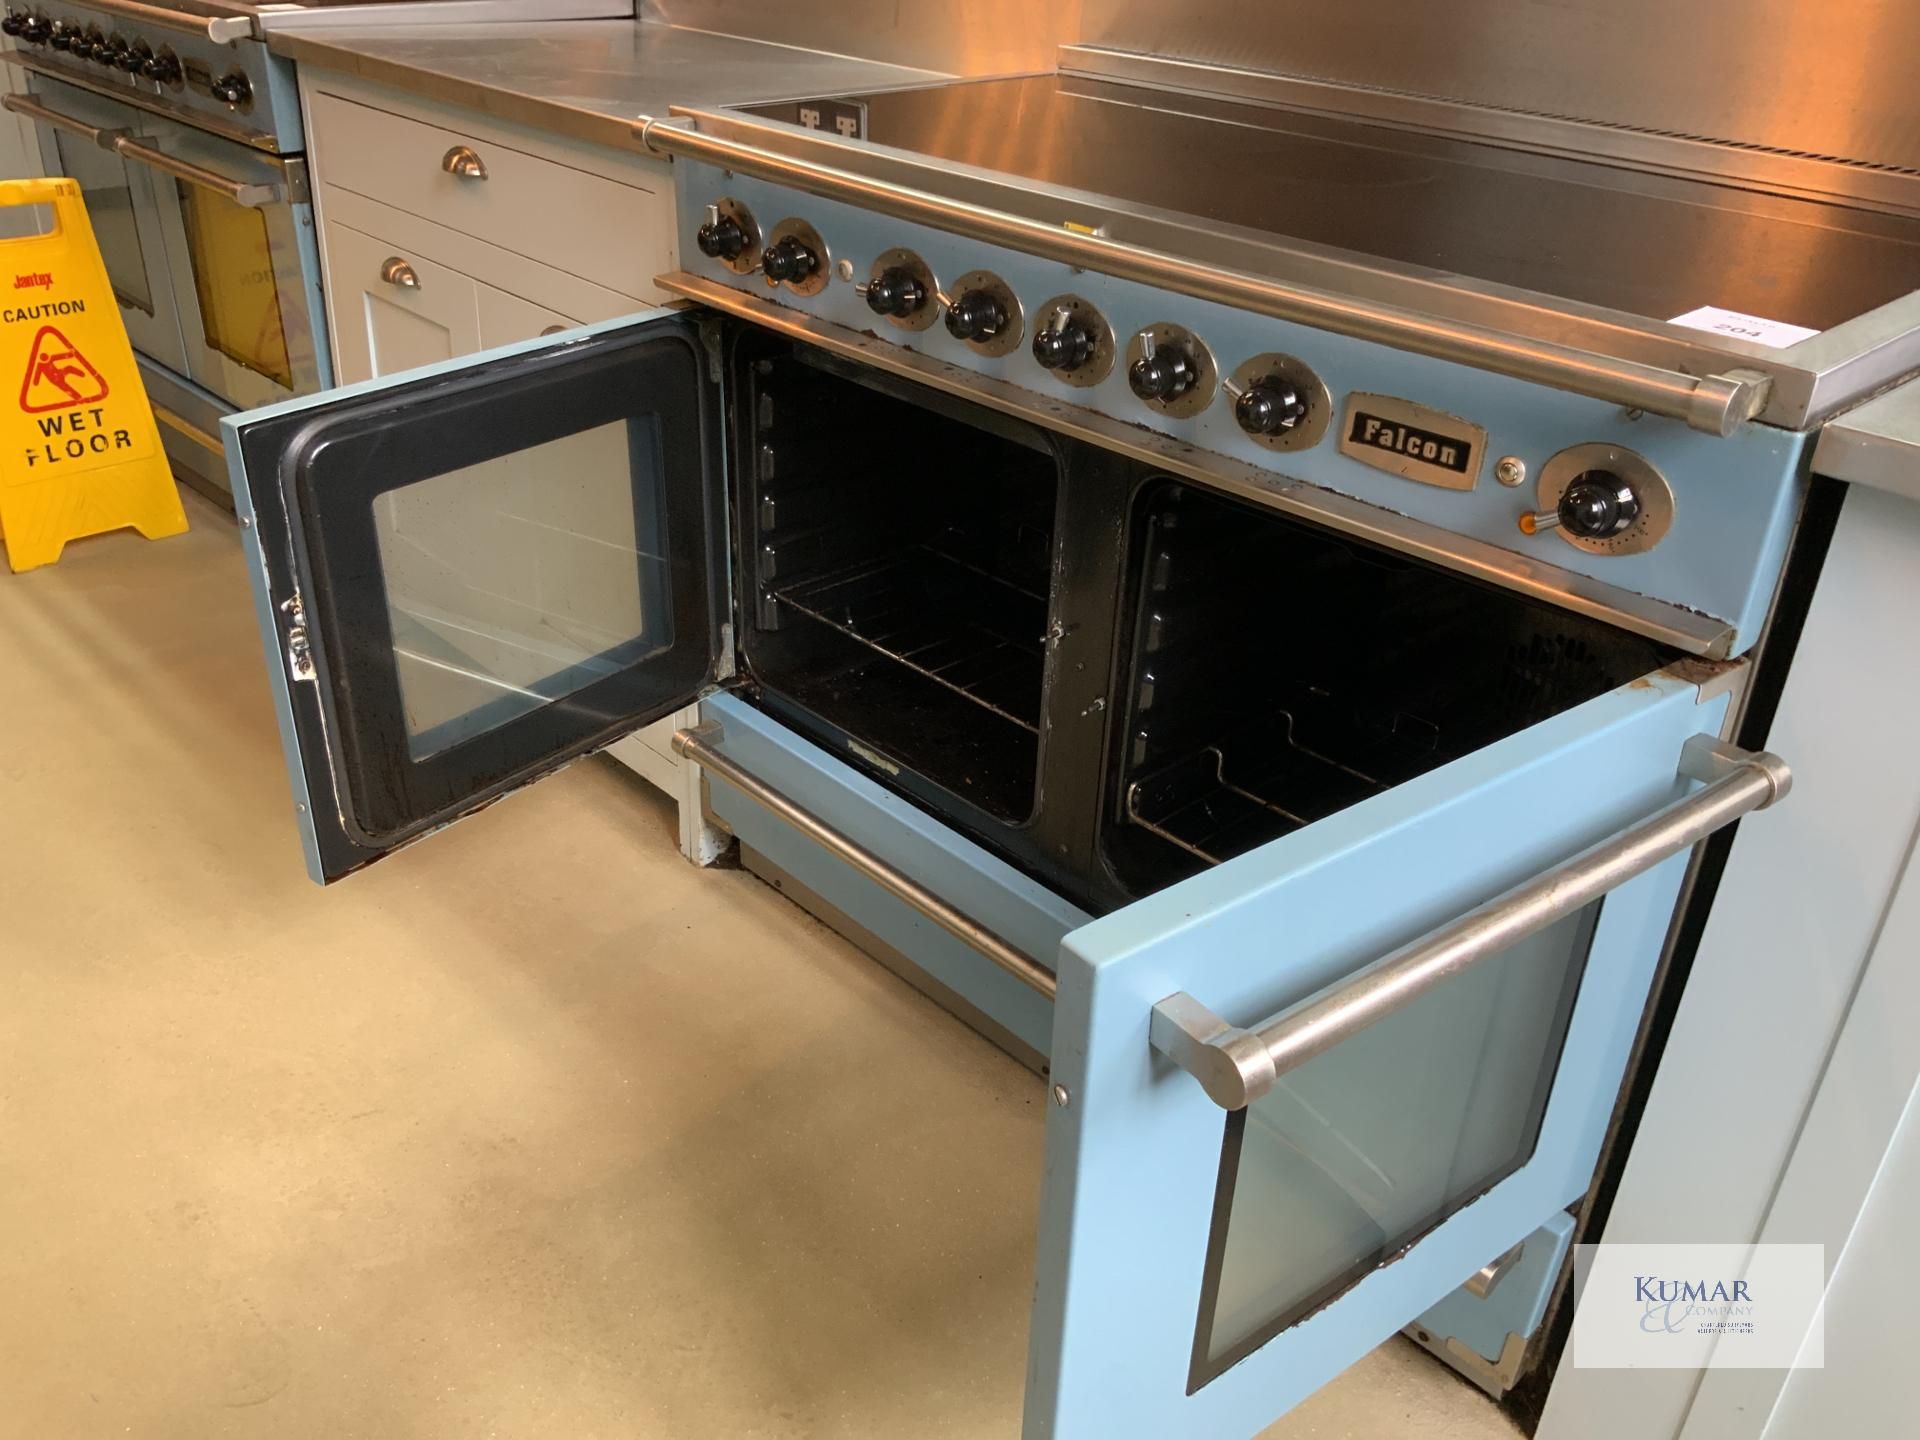 China Blue Aga Rangemaster Falcon Continental 1092 Range Cookers with Twin Ovens & 5 Position - Image 5 of 6